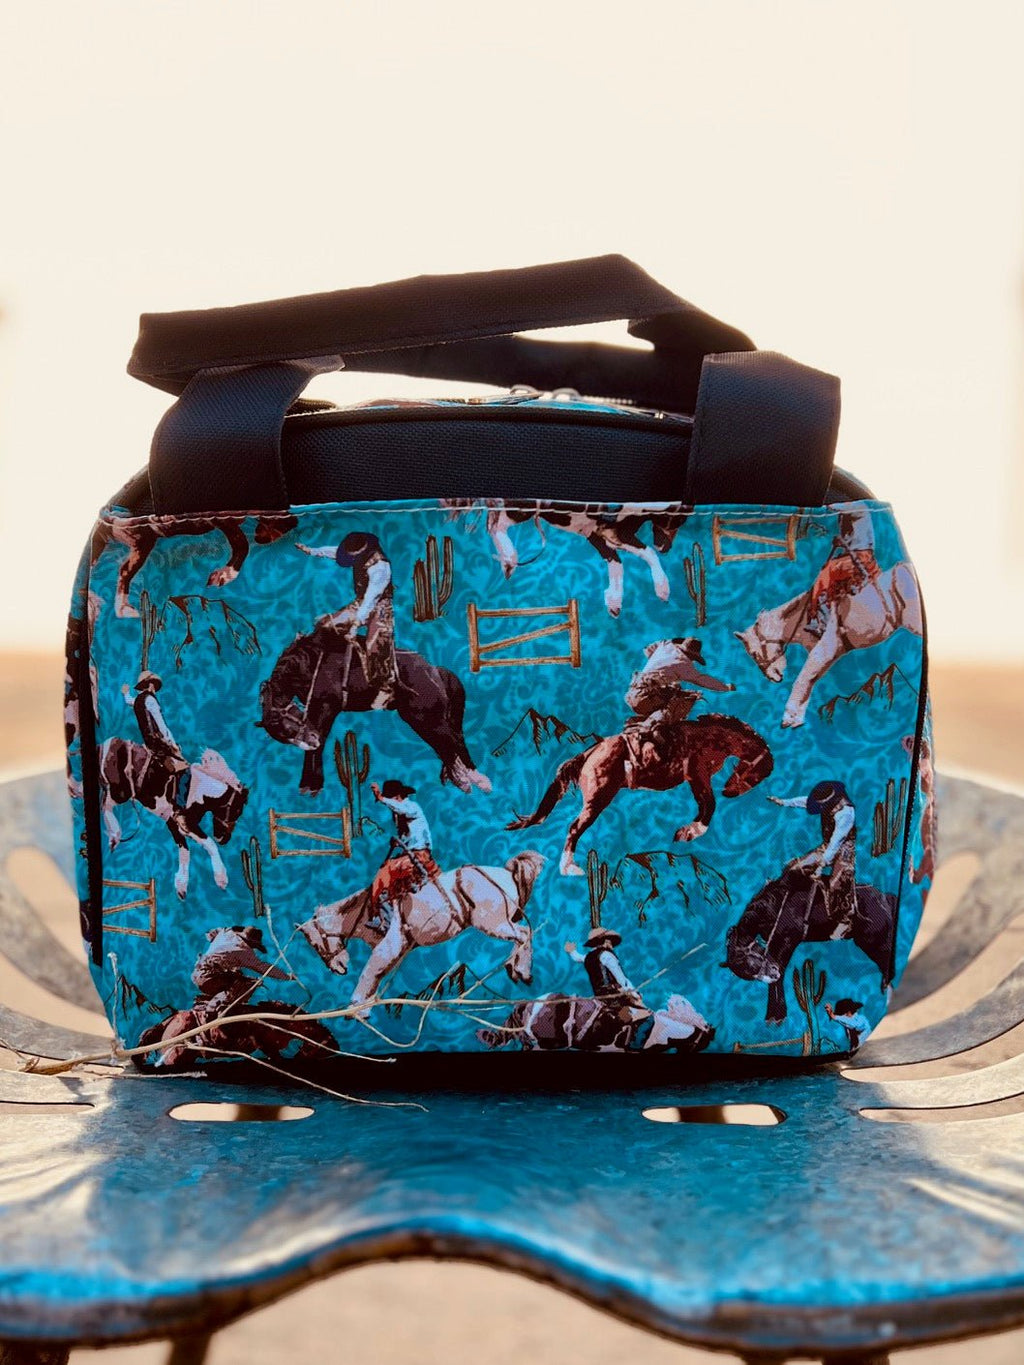 Rough Riders Lunch Box | gussieduponline